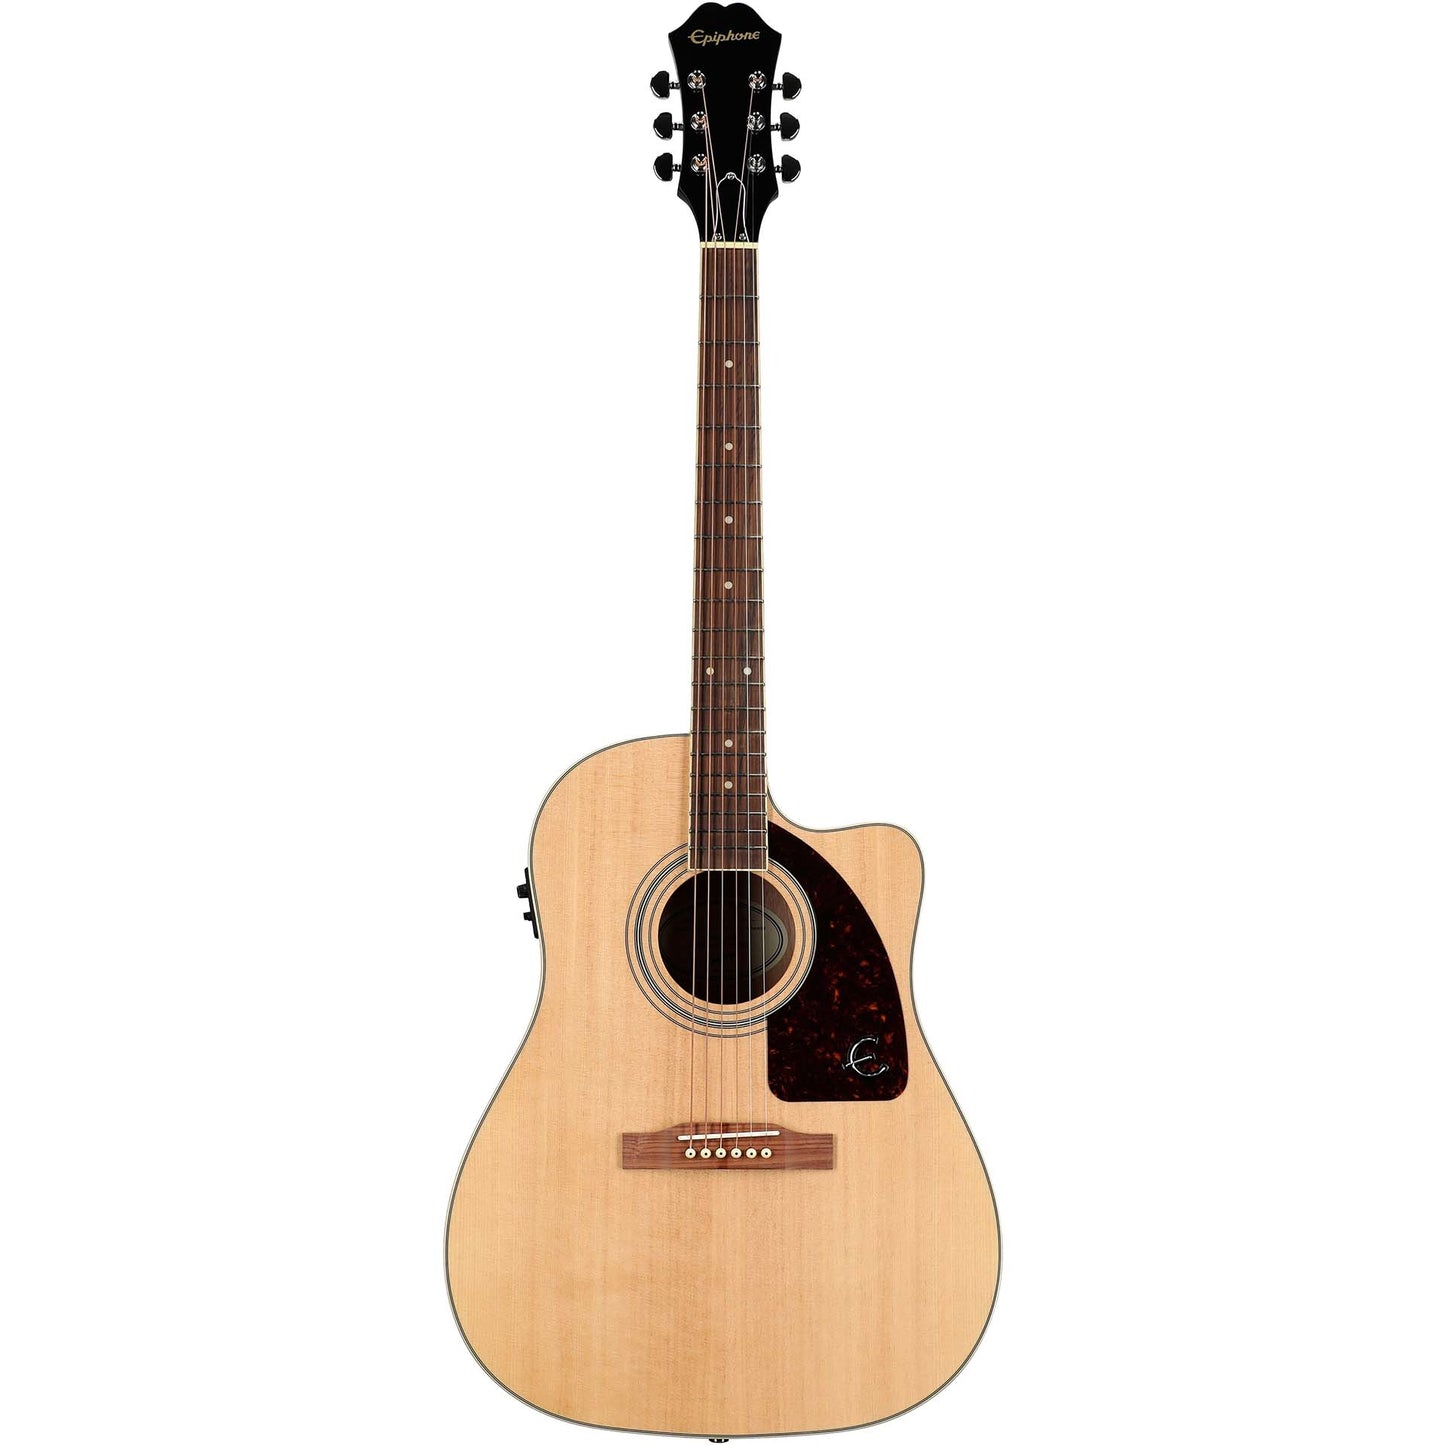 Epiphone AJ-220SCE Acoustic Electric Guitar, Natural (EE2SNANH1)